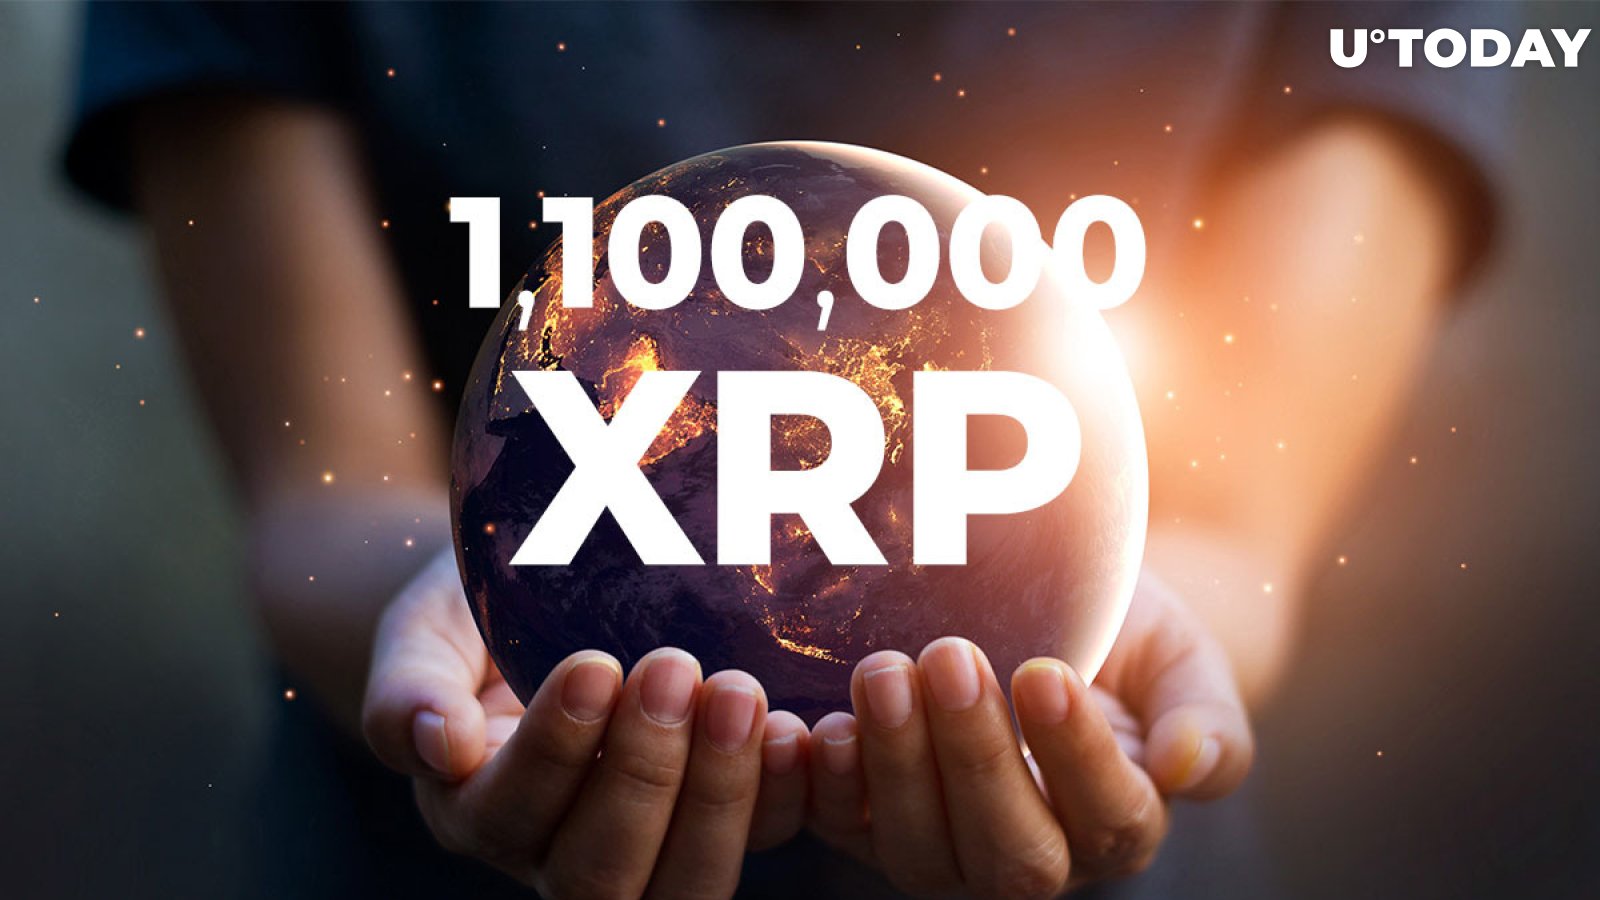 1,100,000 XRP Saved from "Ending Up in Wrong Hands" by XRP Forensics: See Statistics